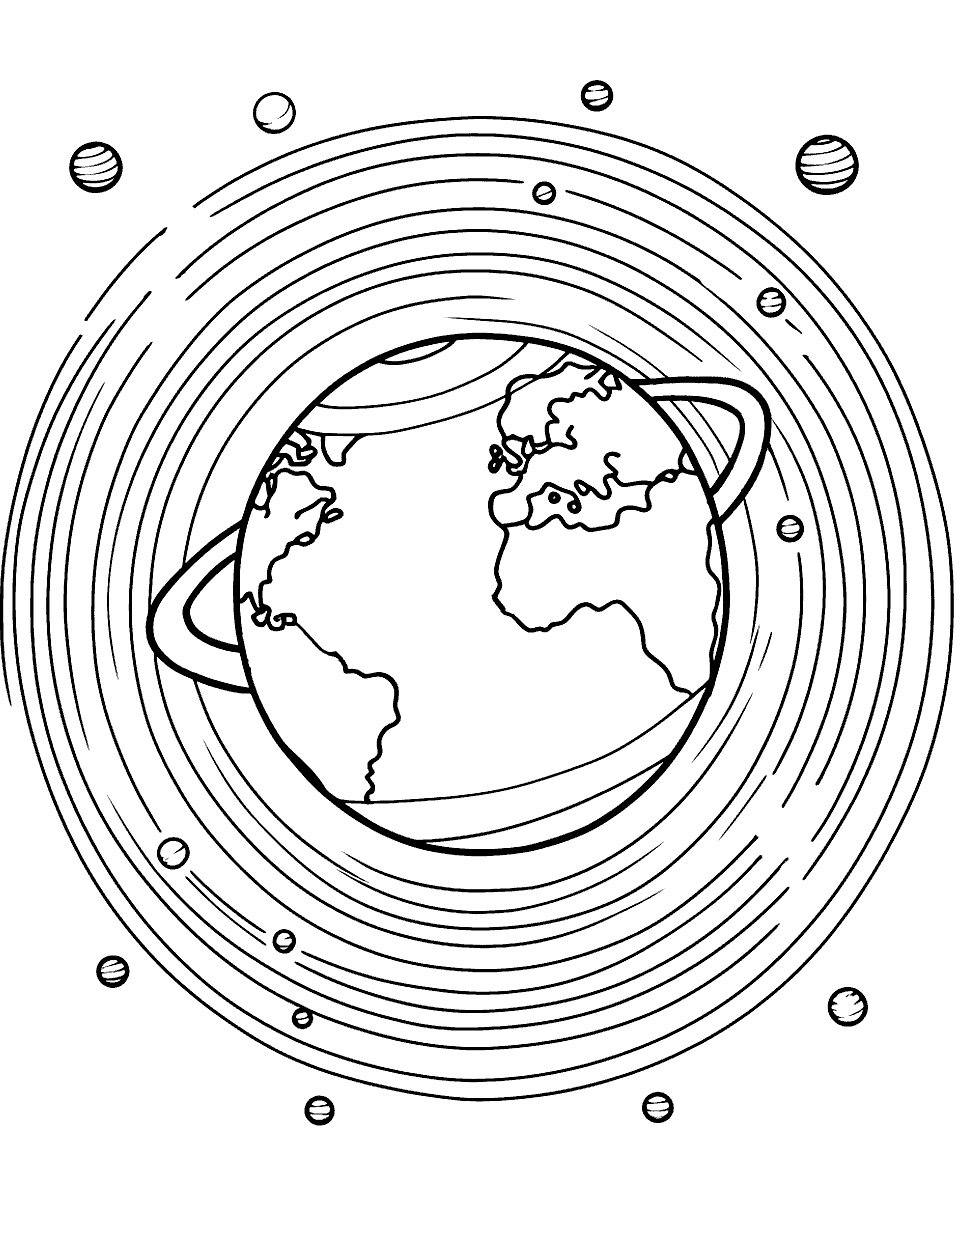 Earth and its Magnetic Field Solar System Coloring Page - Earth with lines showing its magnetic field in space.